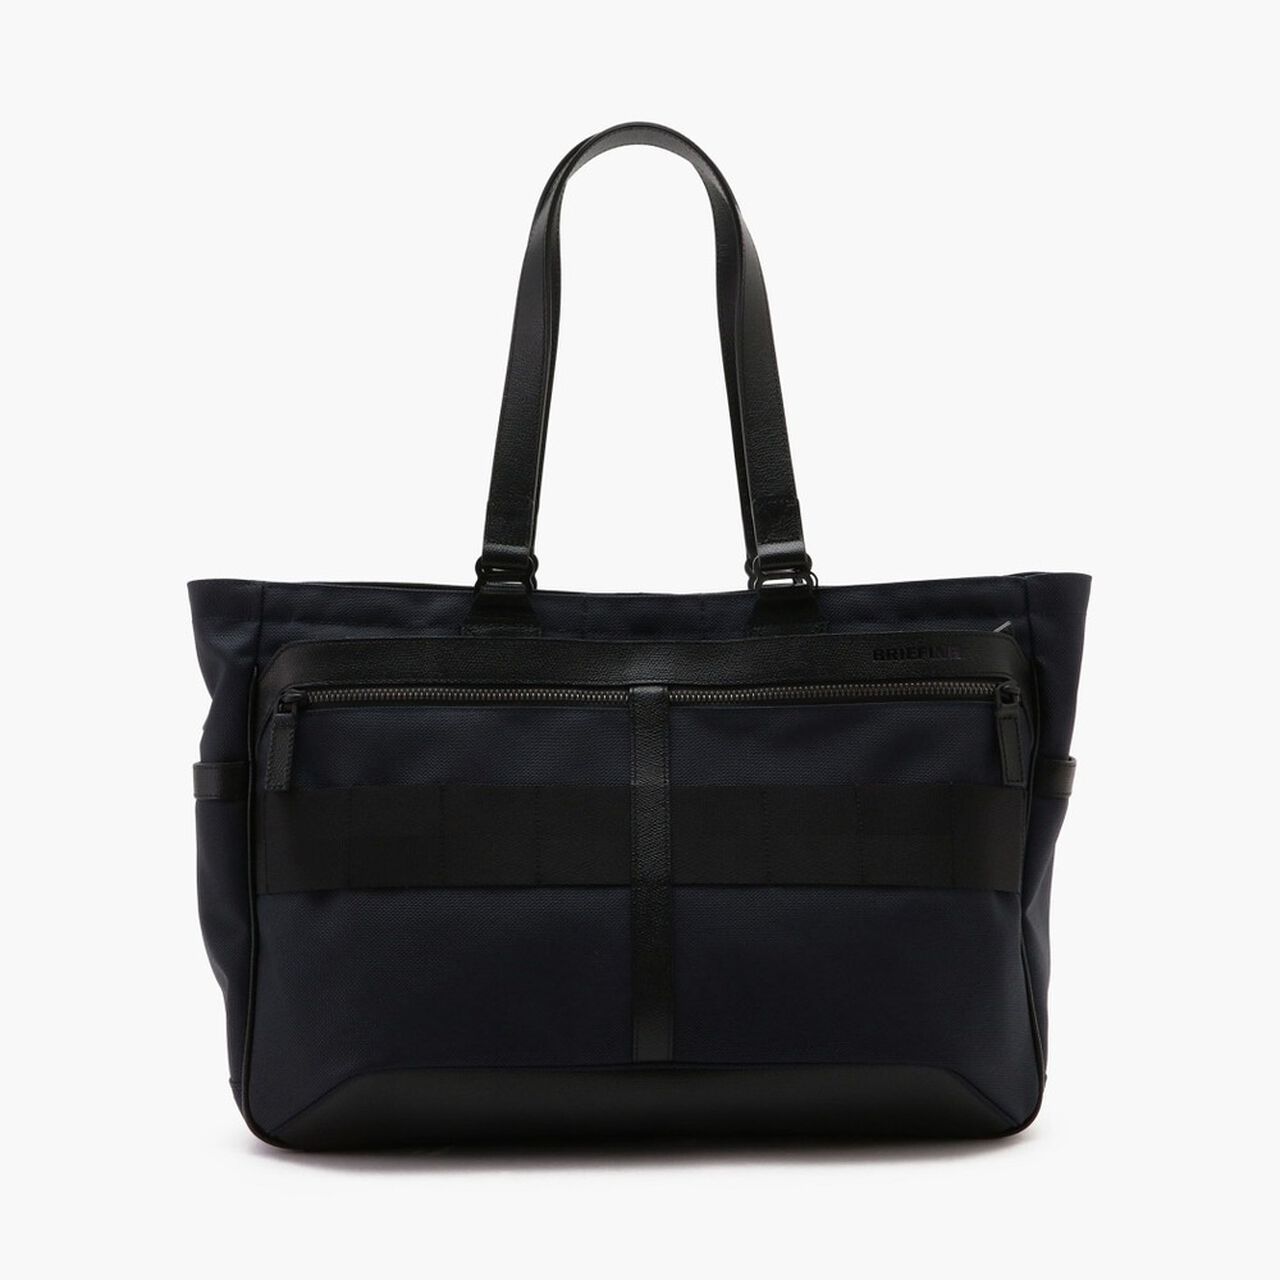 FUSION SQ TOTE HD,Navy, large image number 0